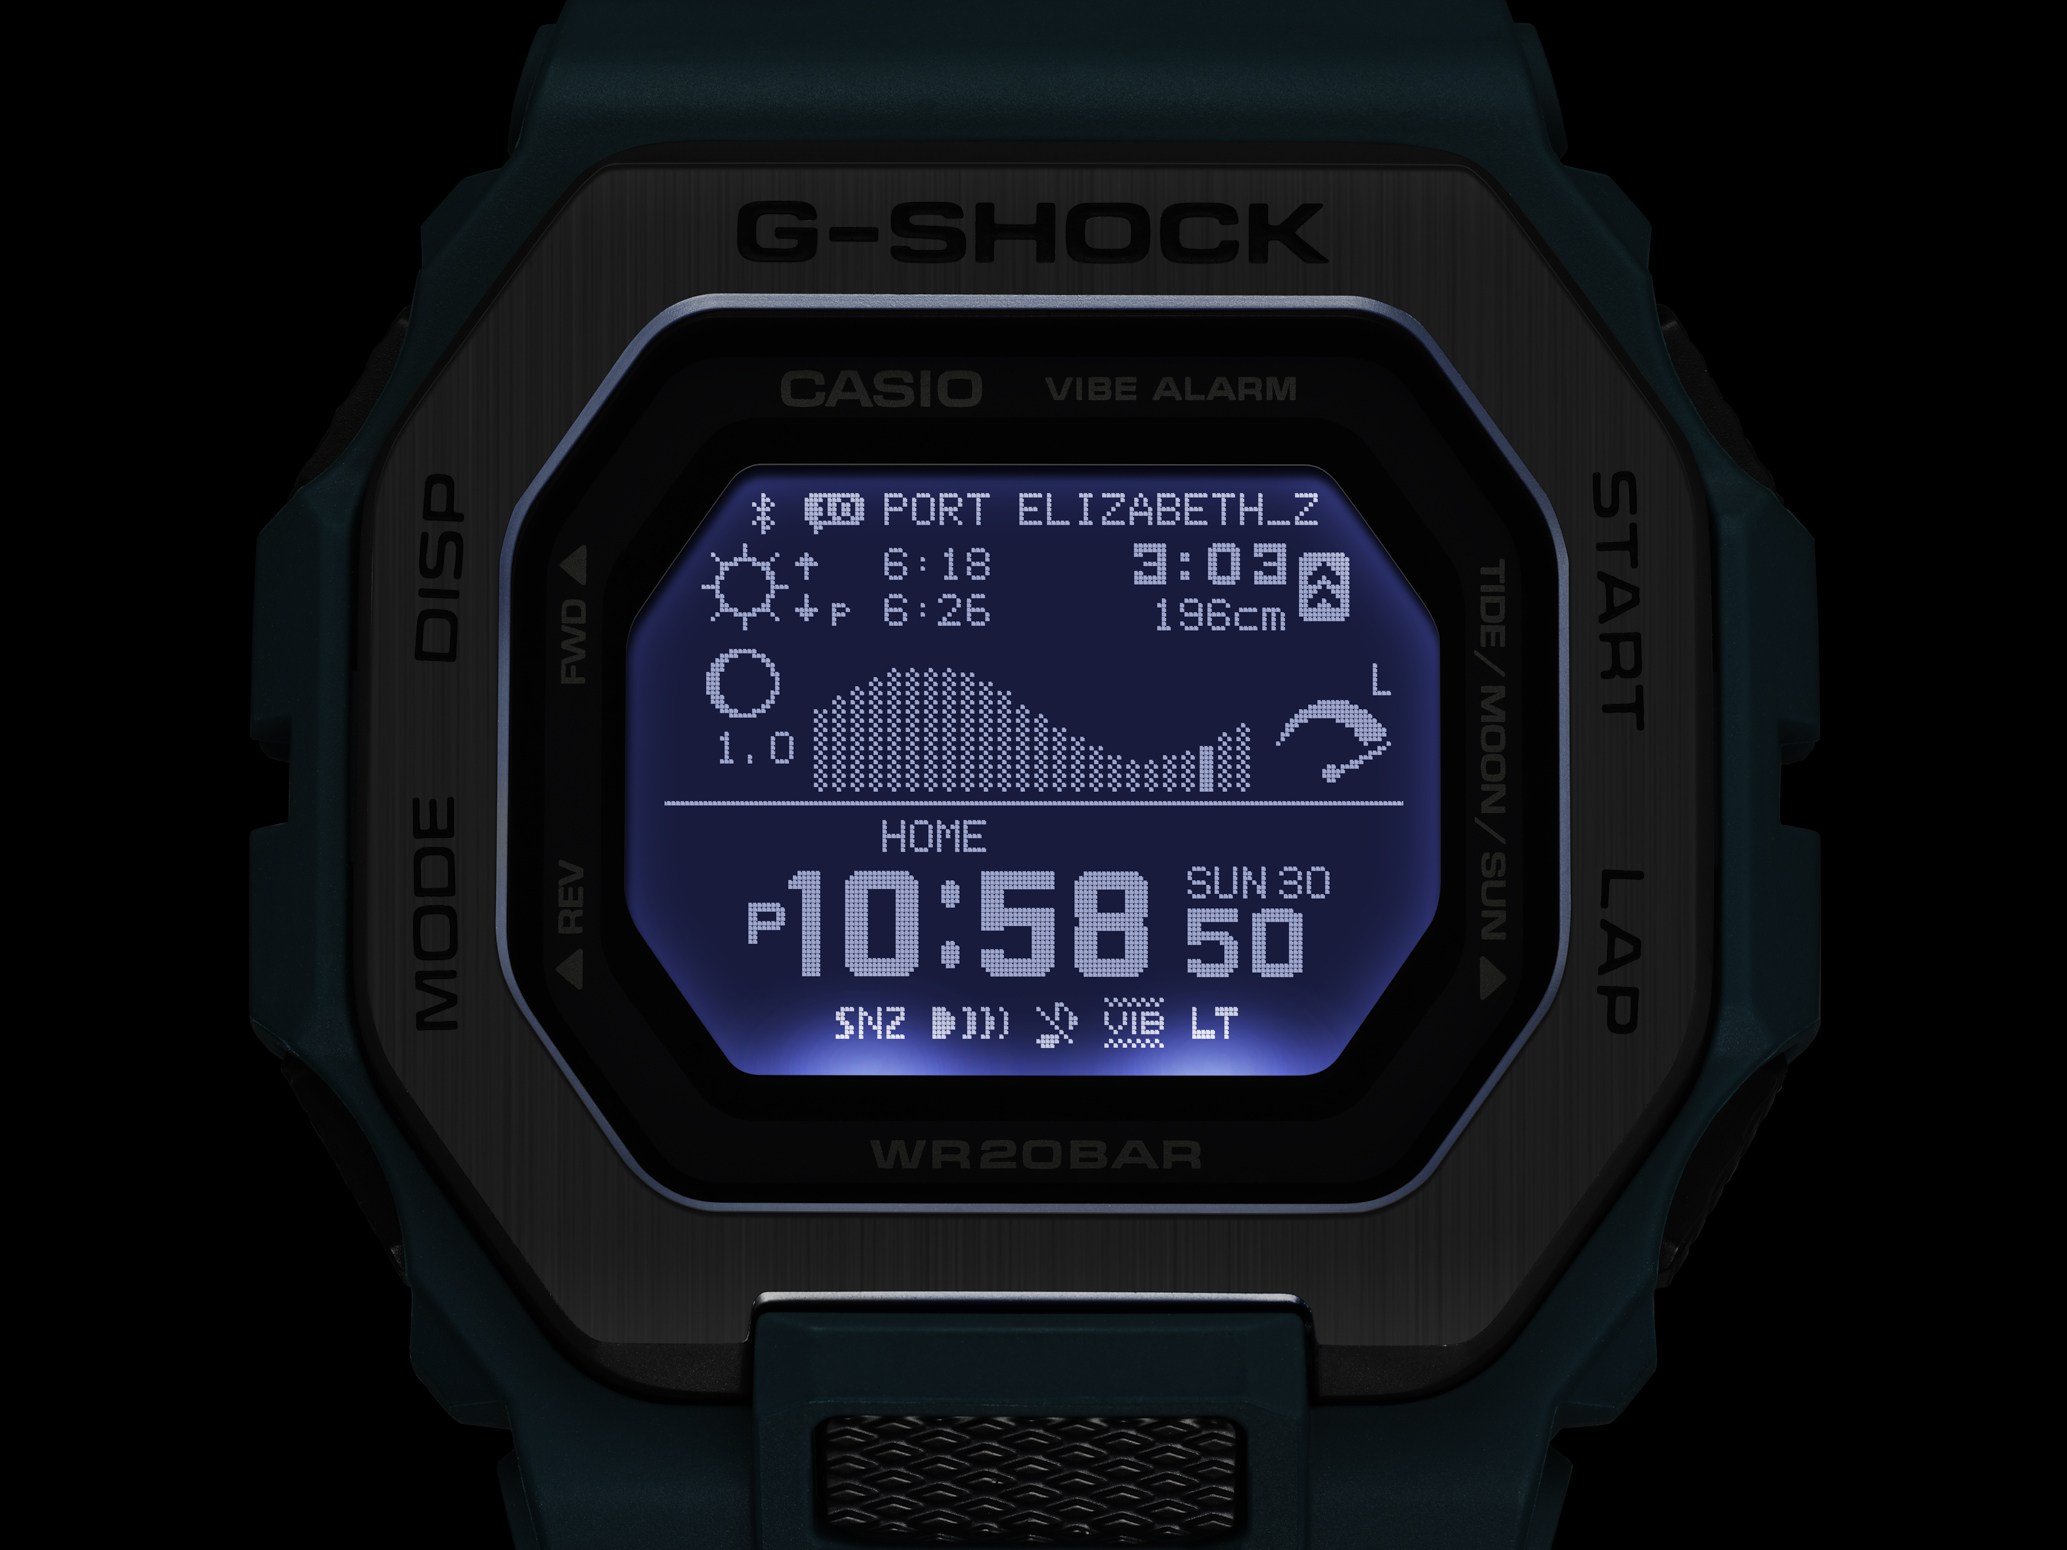 INTRODUCING: The G-Shock G-LIDE tells both time and tide, surfers